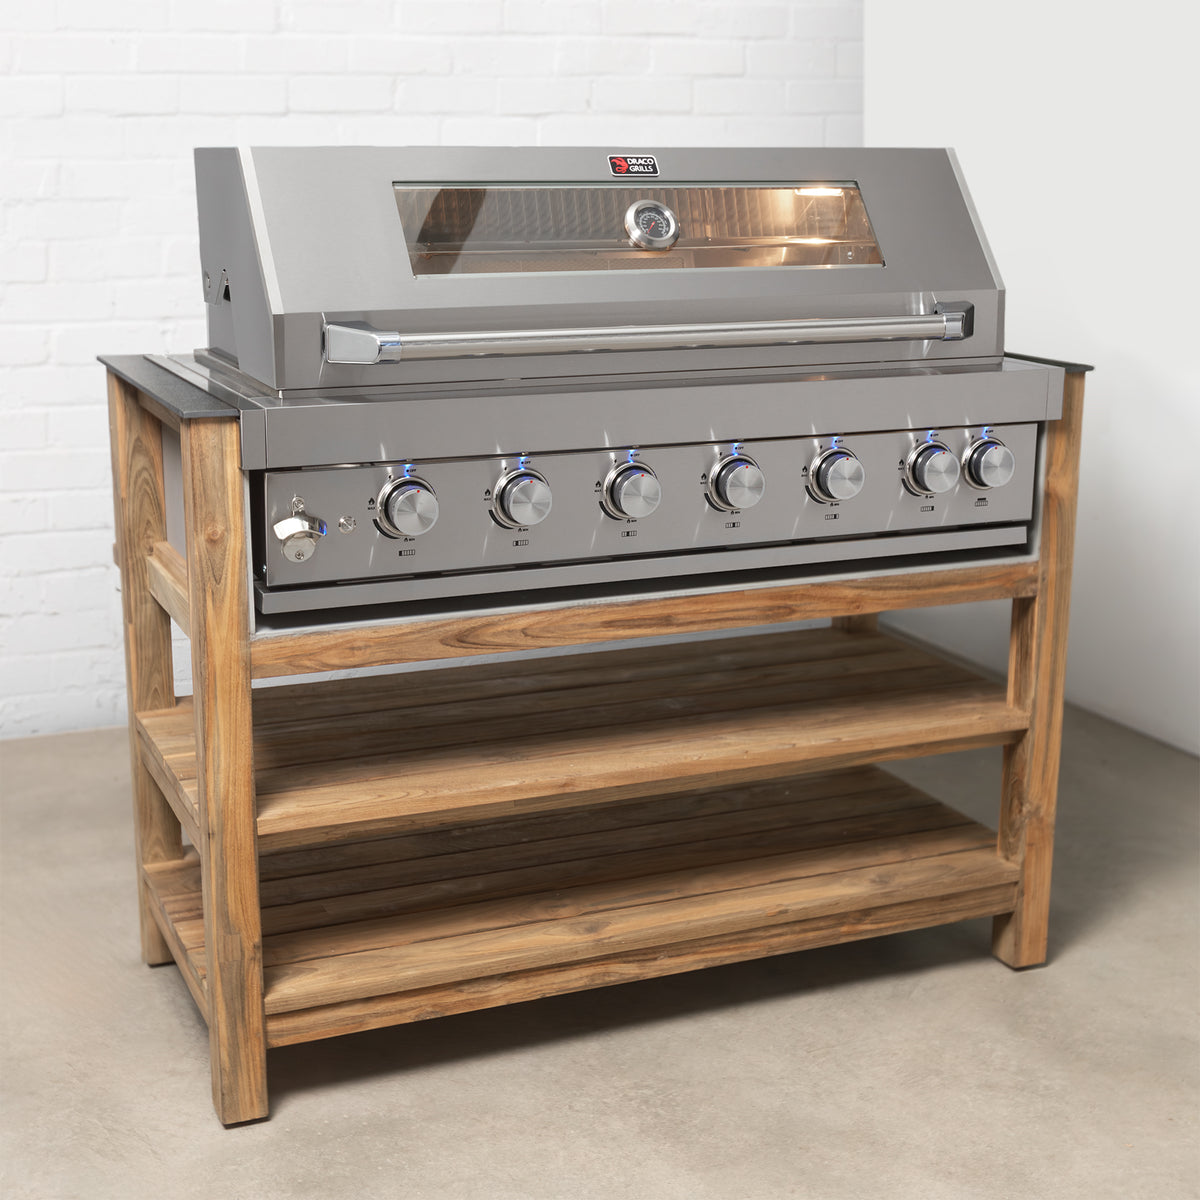 Draco Grills Teak Modular Outdoor Kitchen Barbecue Unit with 6 Burner Barbecue